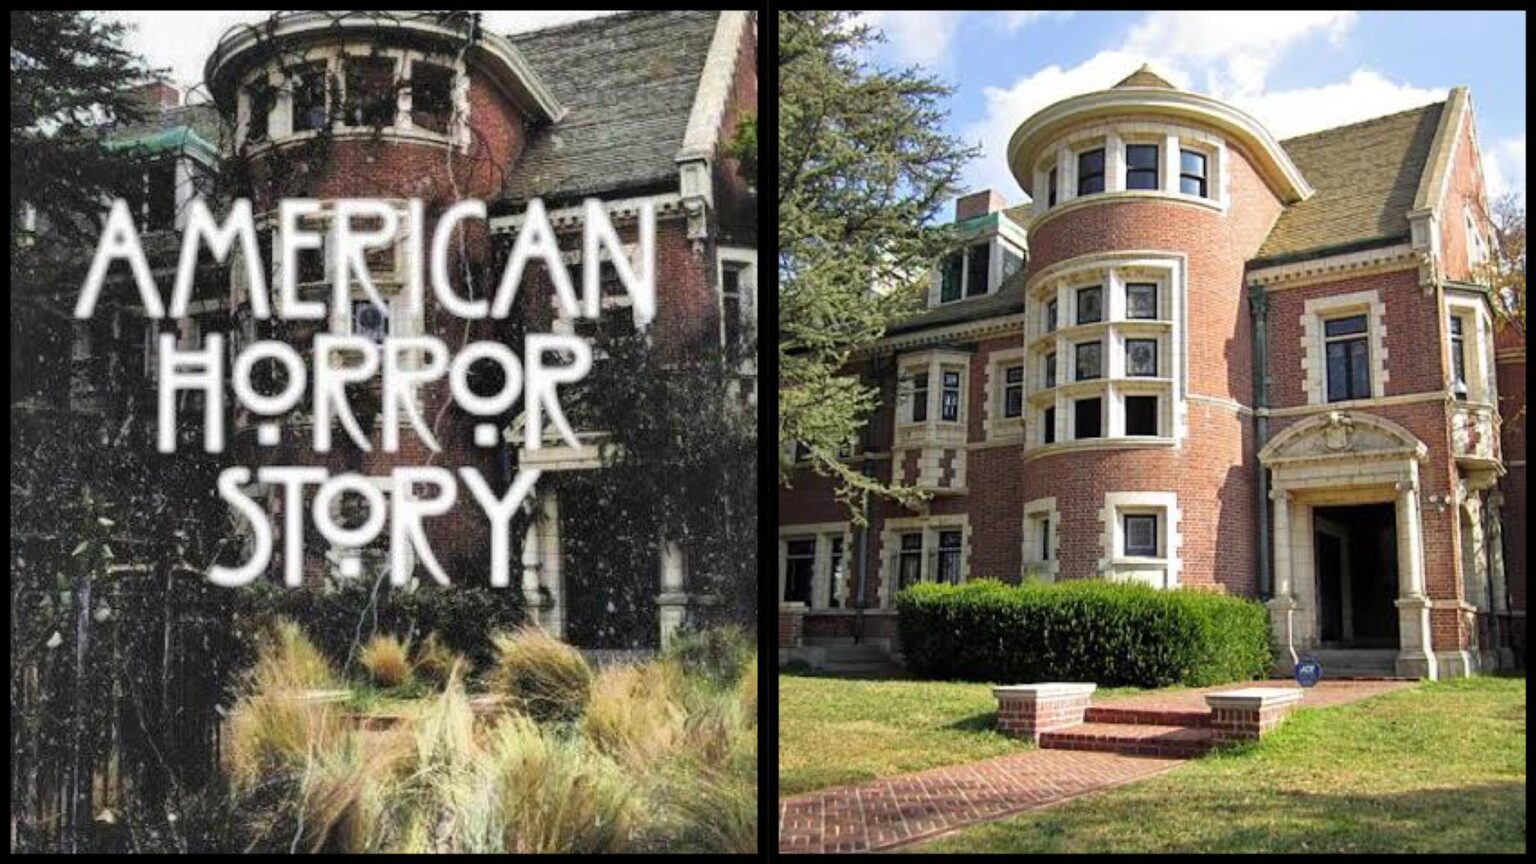 Want To Win A Chance To Sleep In The American Horror Story Murder House